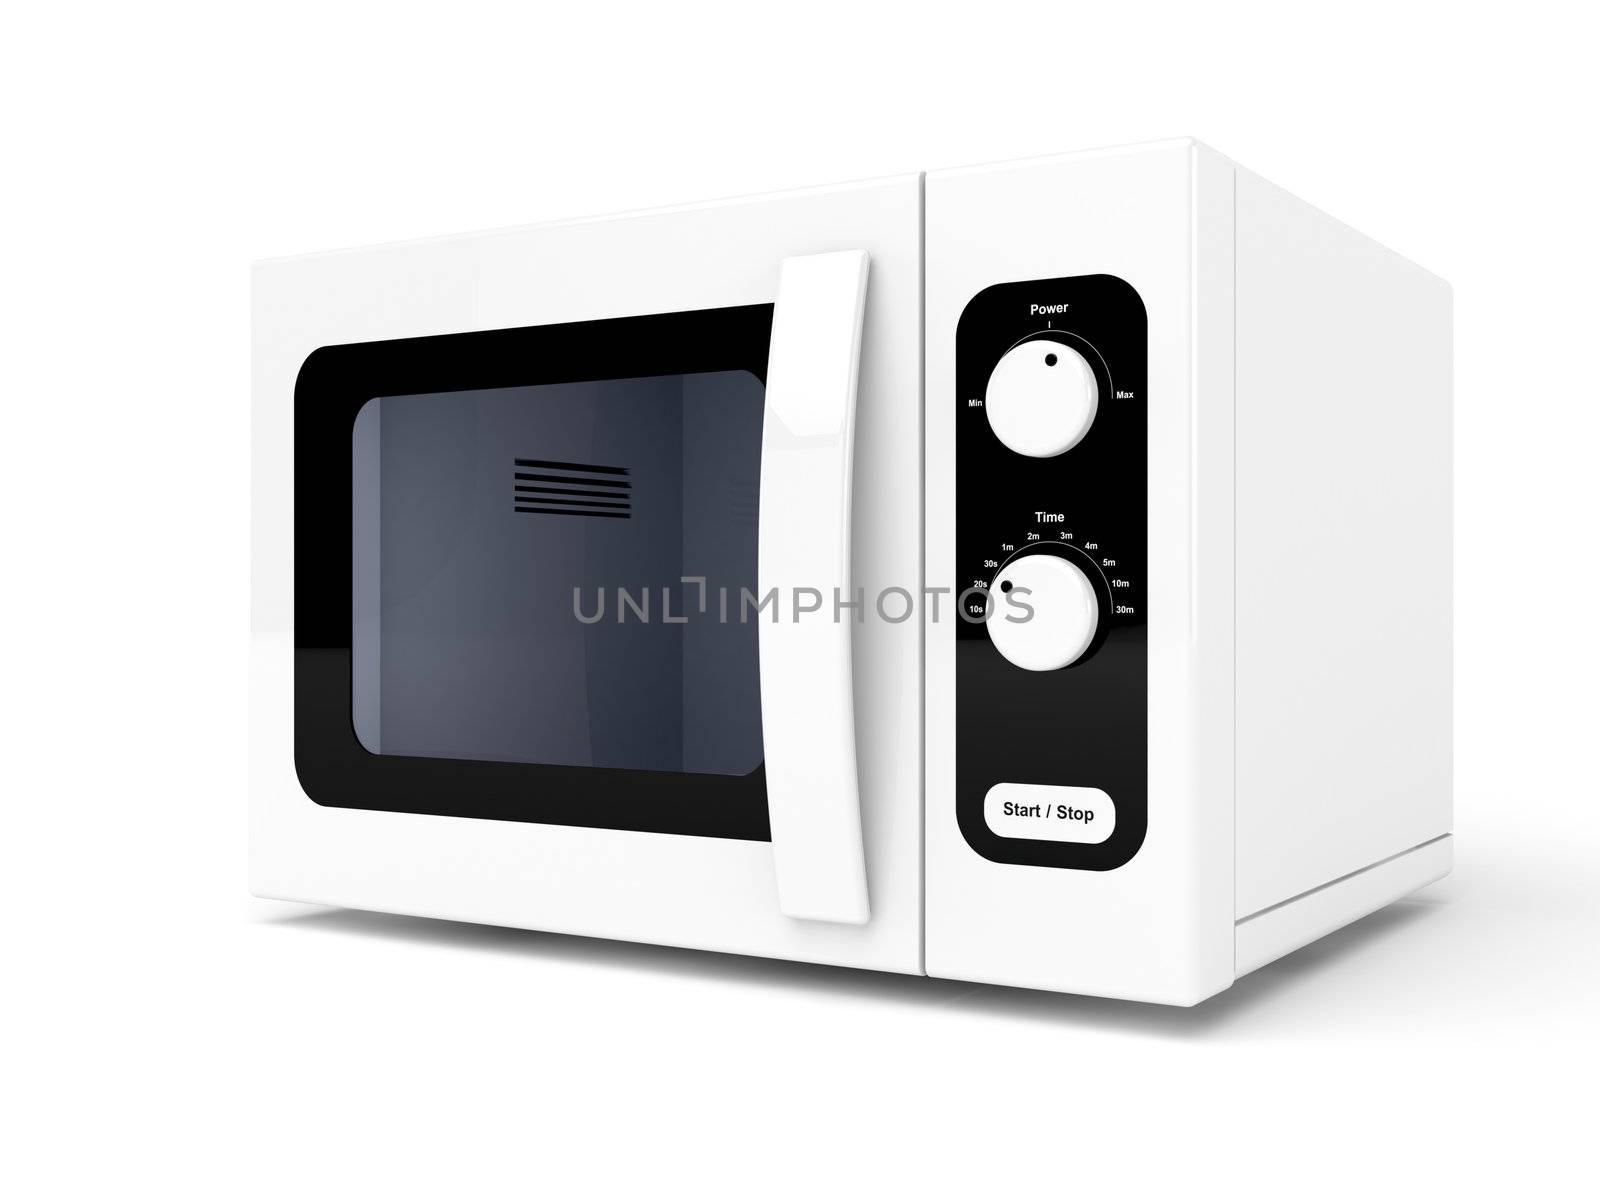 Microwave oven by magraphics